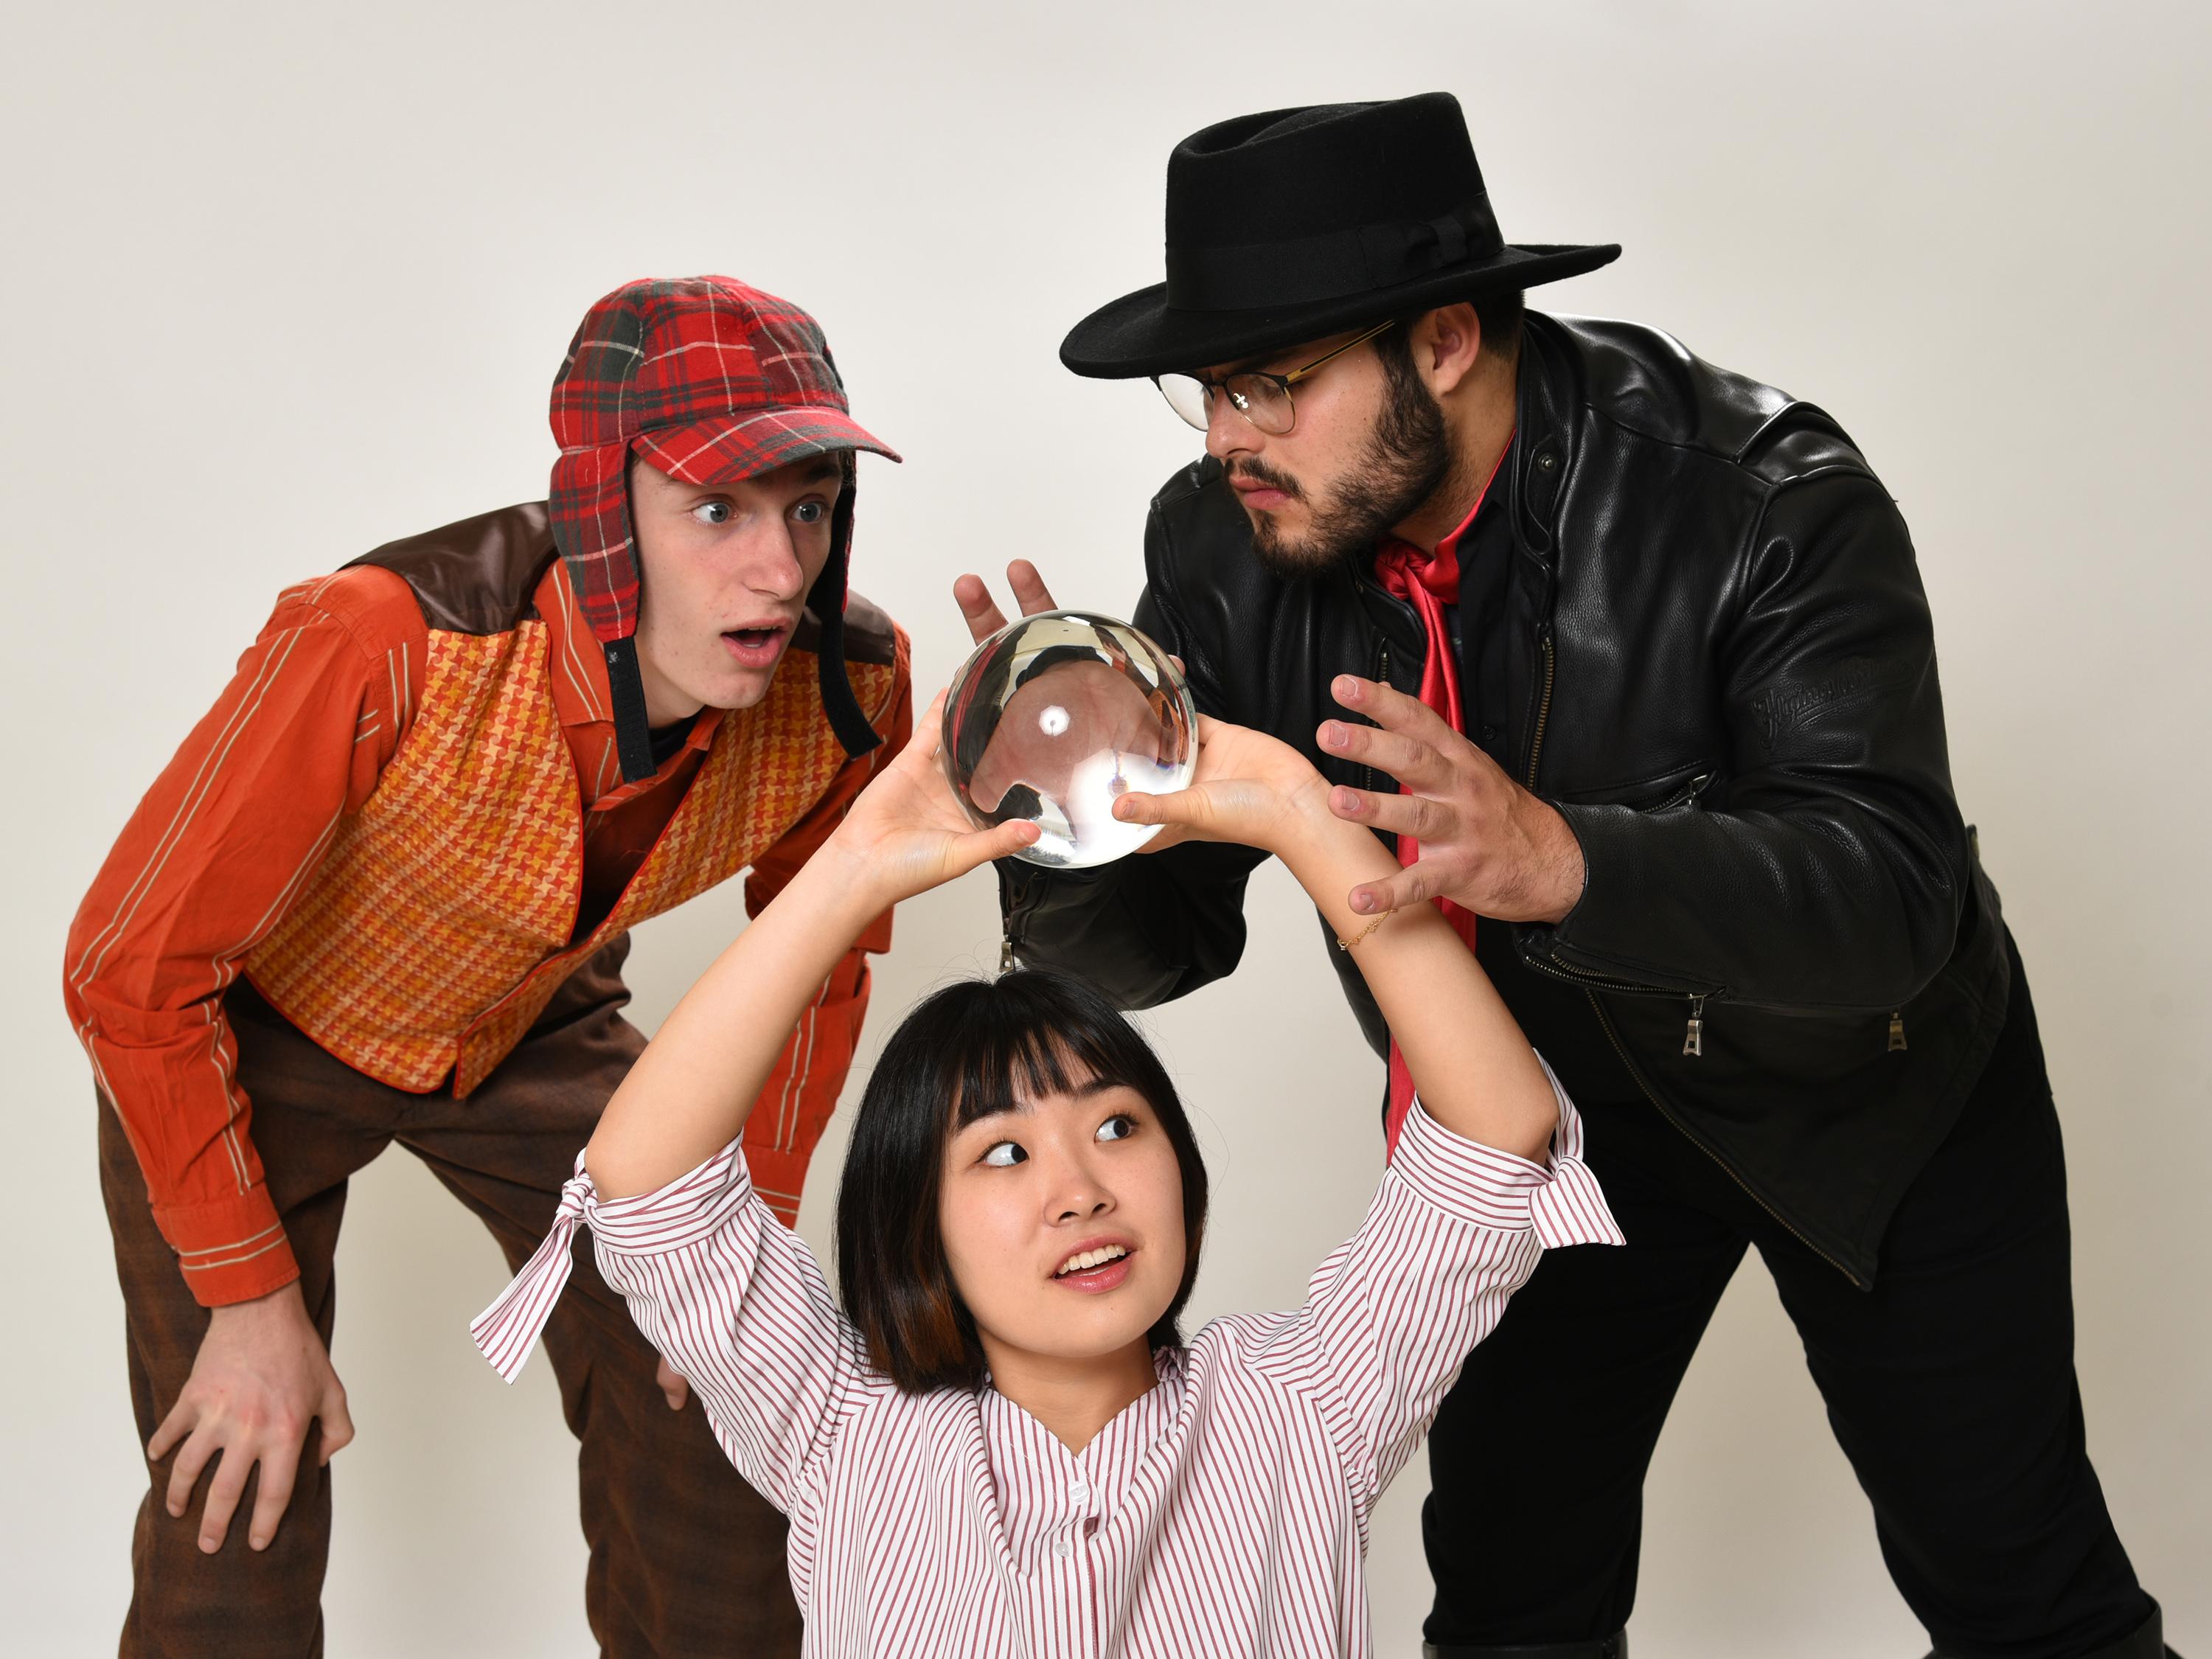 Rehearsal image of performers trying to discern the future via a crystal ball